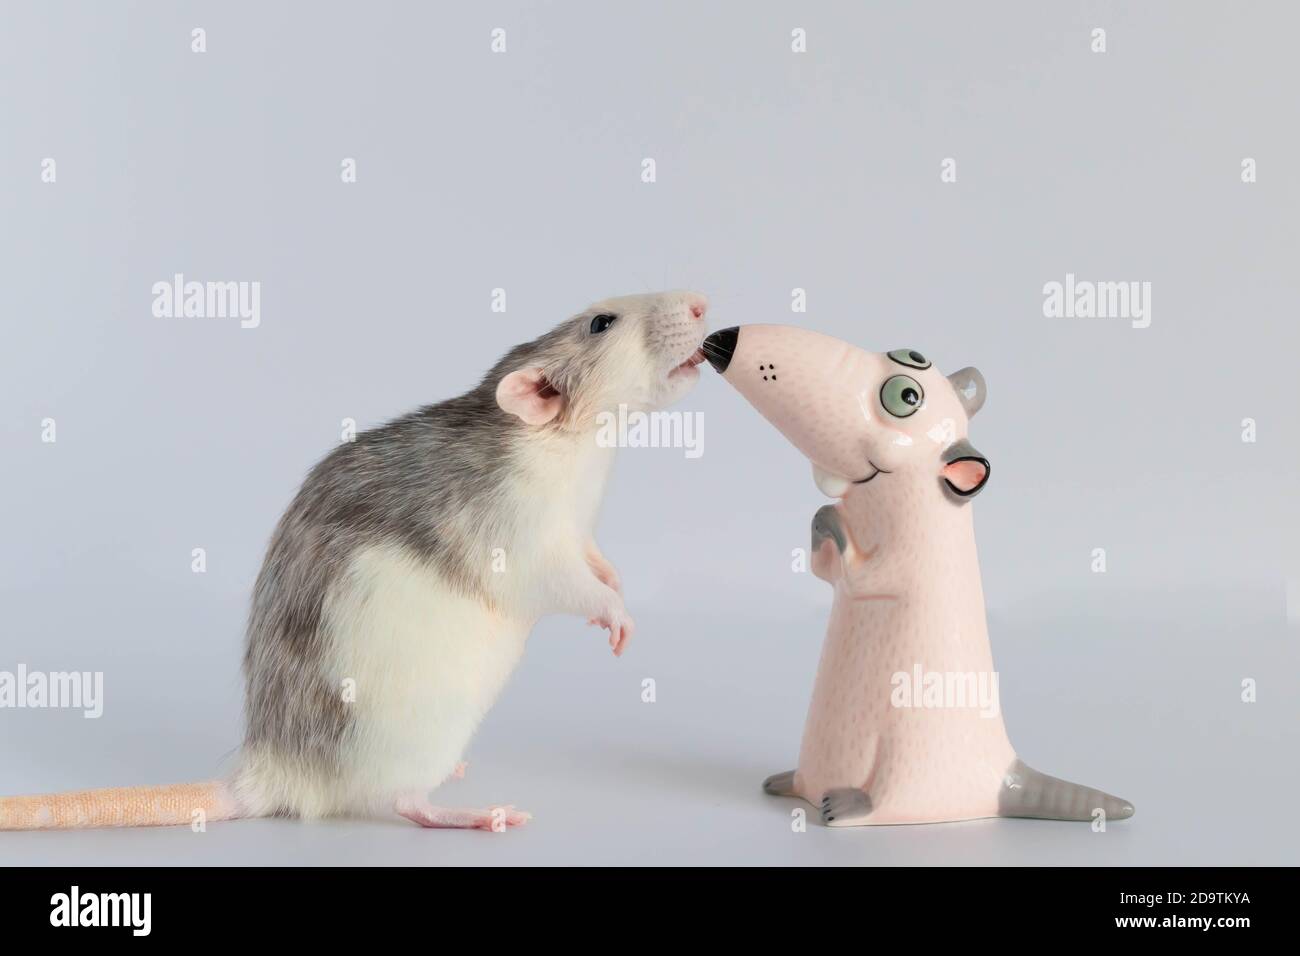 A cute little decorative rat stands on its hind legs and looks at the toy figurine. Portrait of a rodent close-up. Nose to nose. Stock Photo